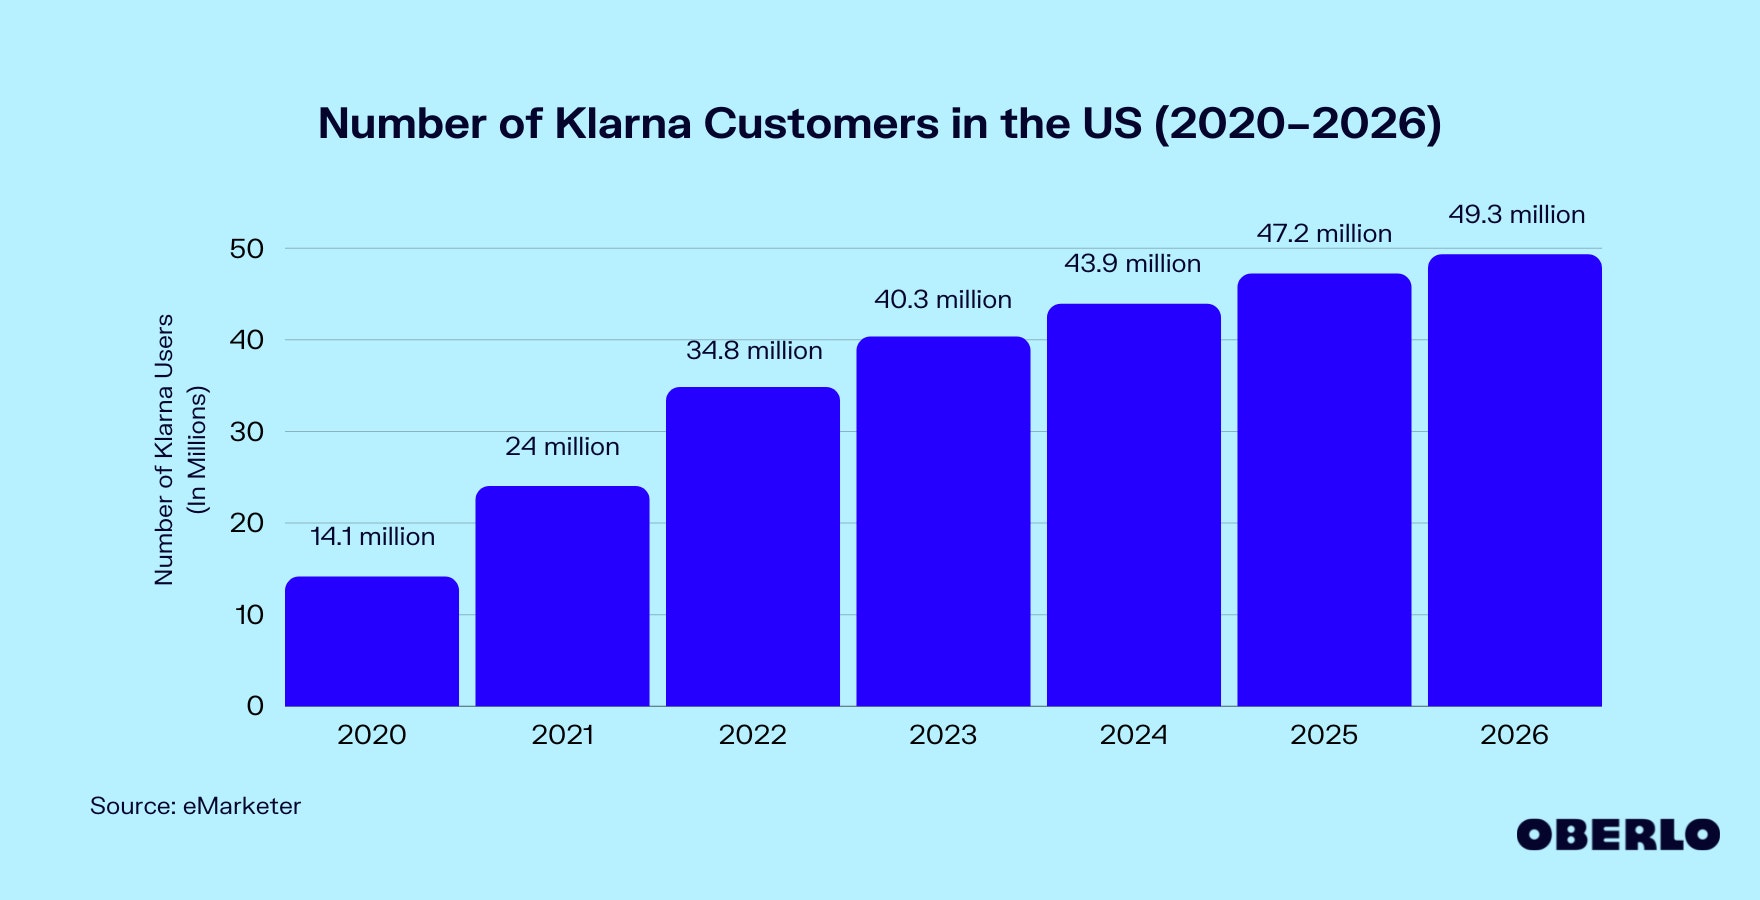 Chart showing the Number of Klarna customers in the US